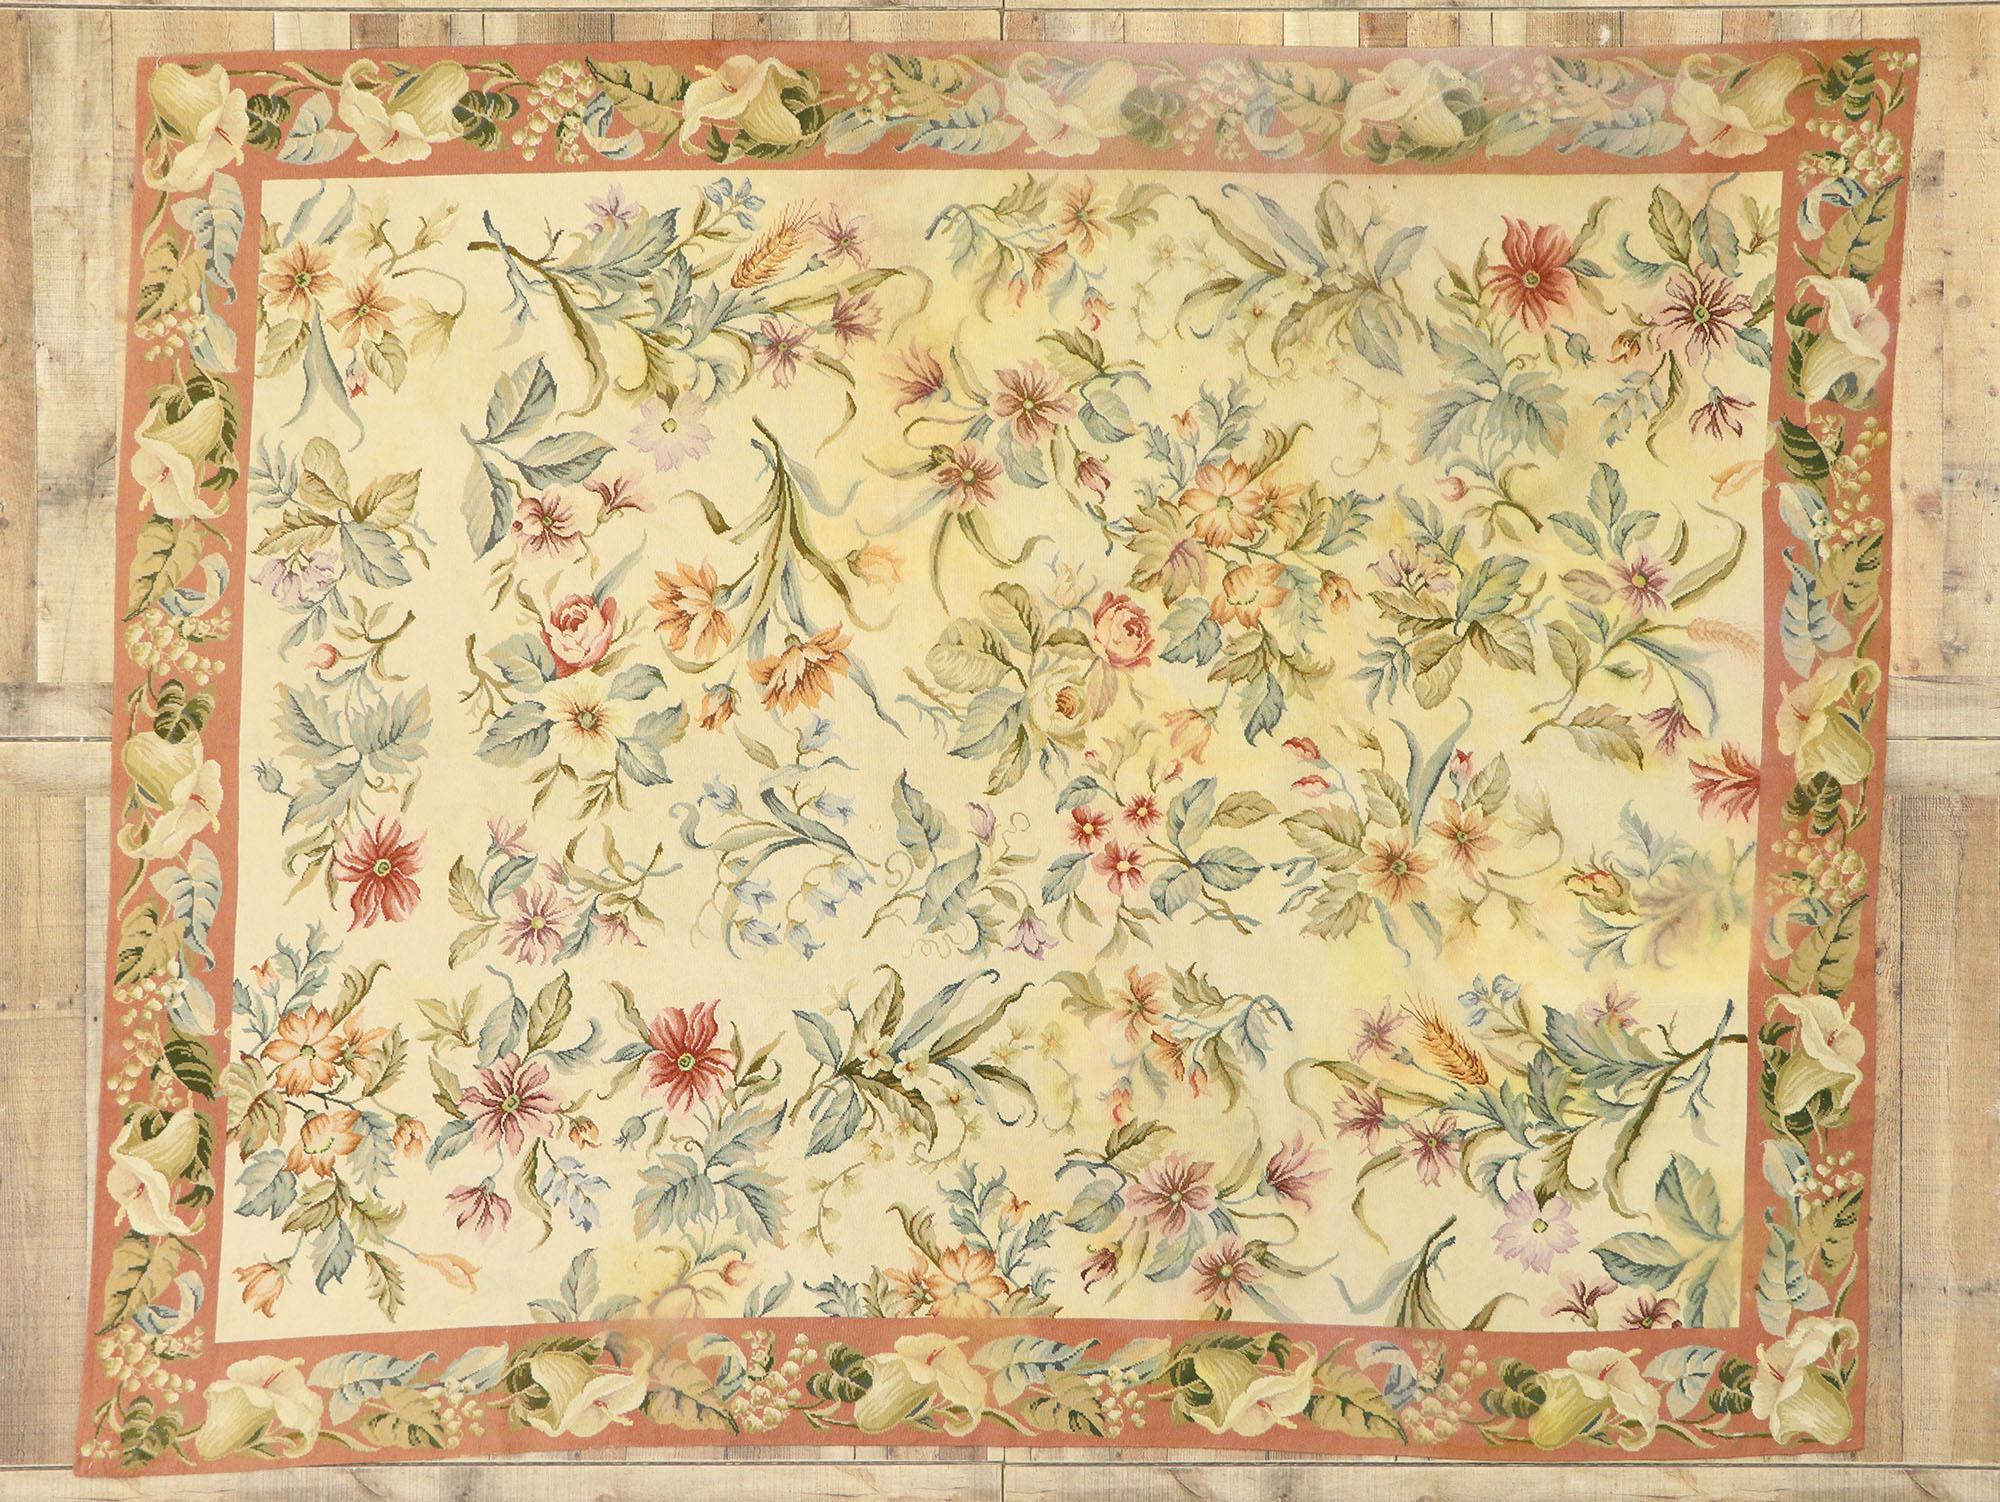 Vintage Chinese Floral Needlepoint Rug with Garden Conservatory Style In Fair Condition For Sale In Dallas, TX